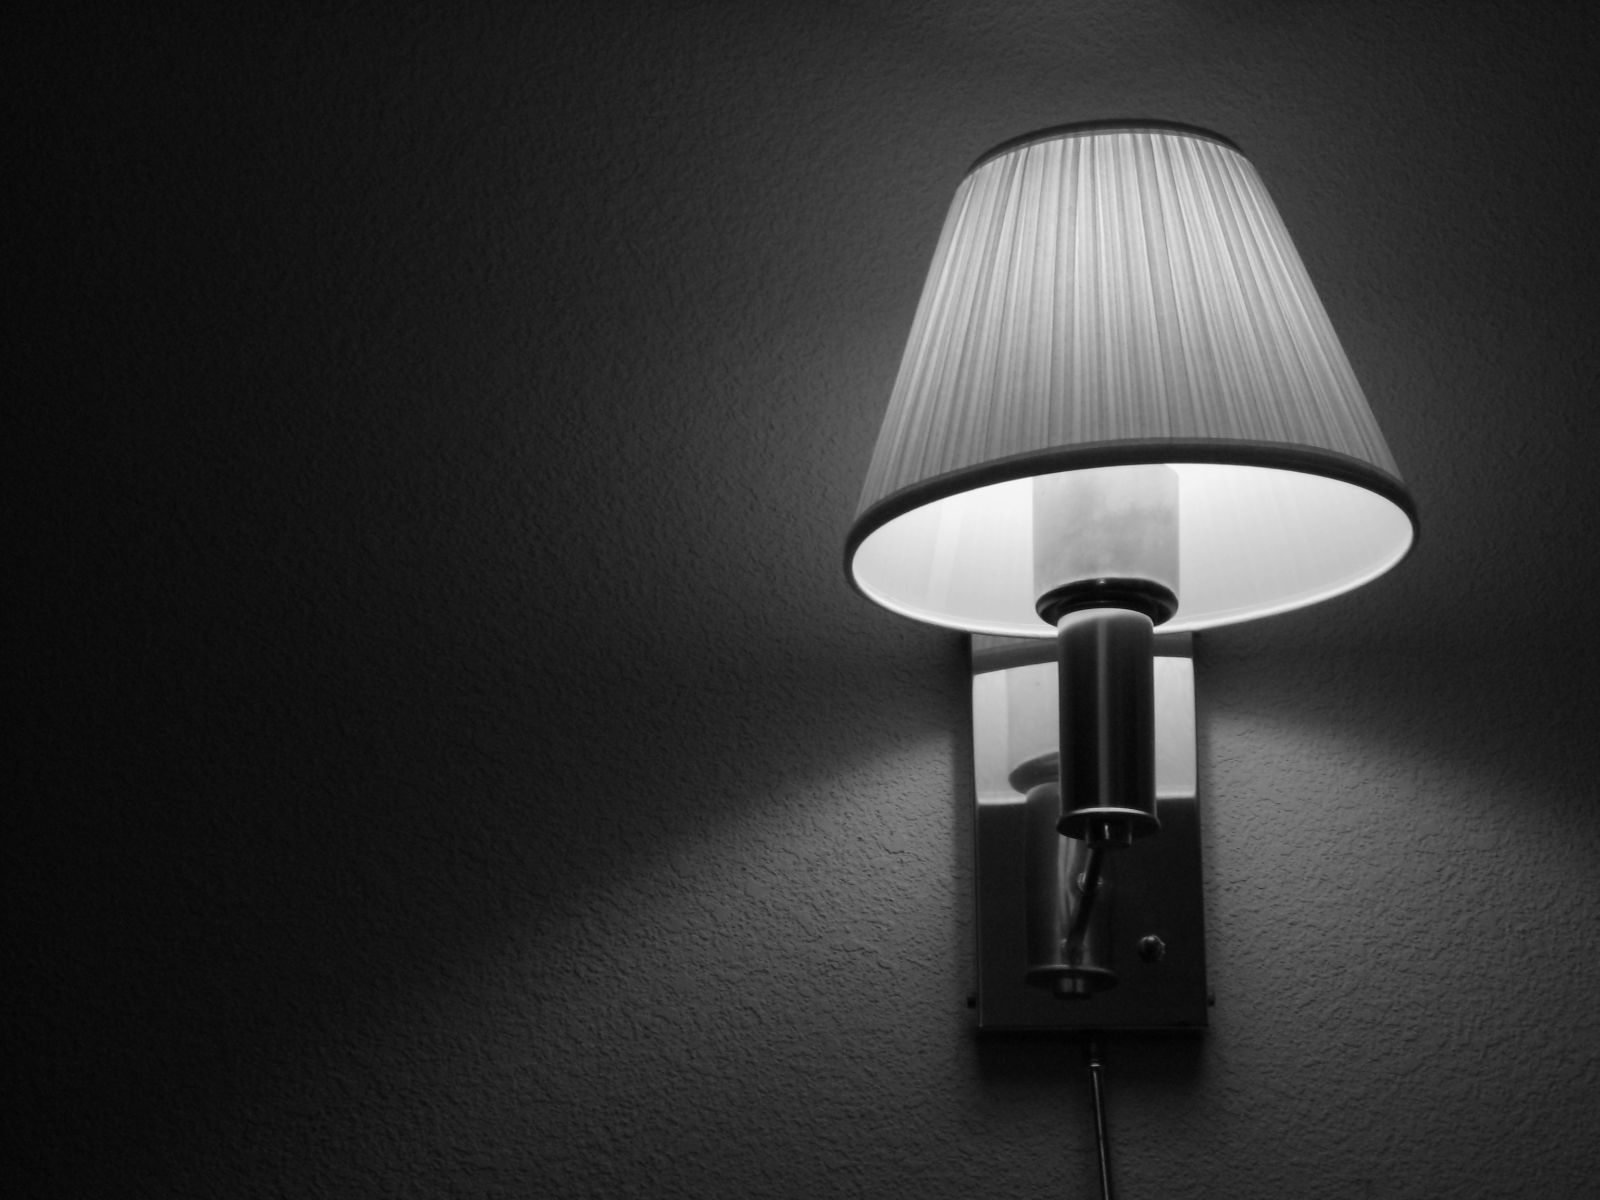 500 Lamp Pictures  Download Free Images on Unsplash